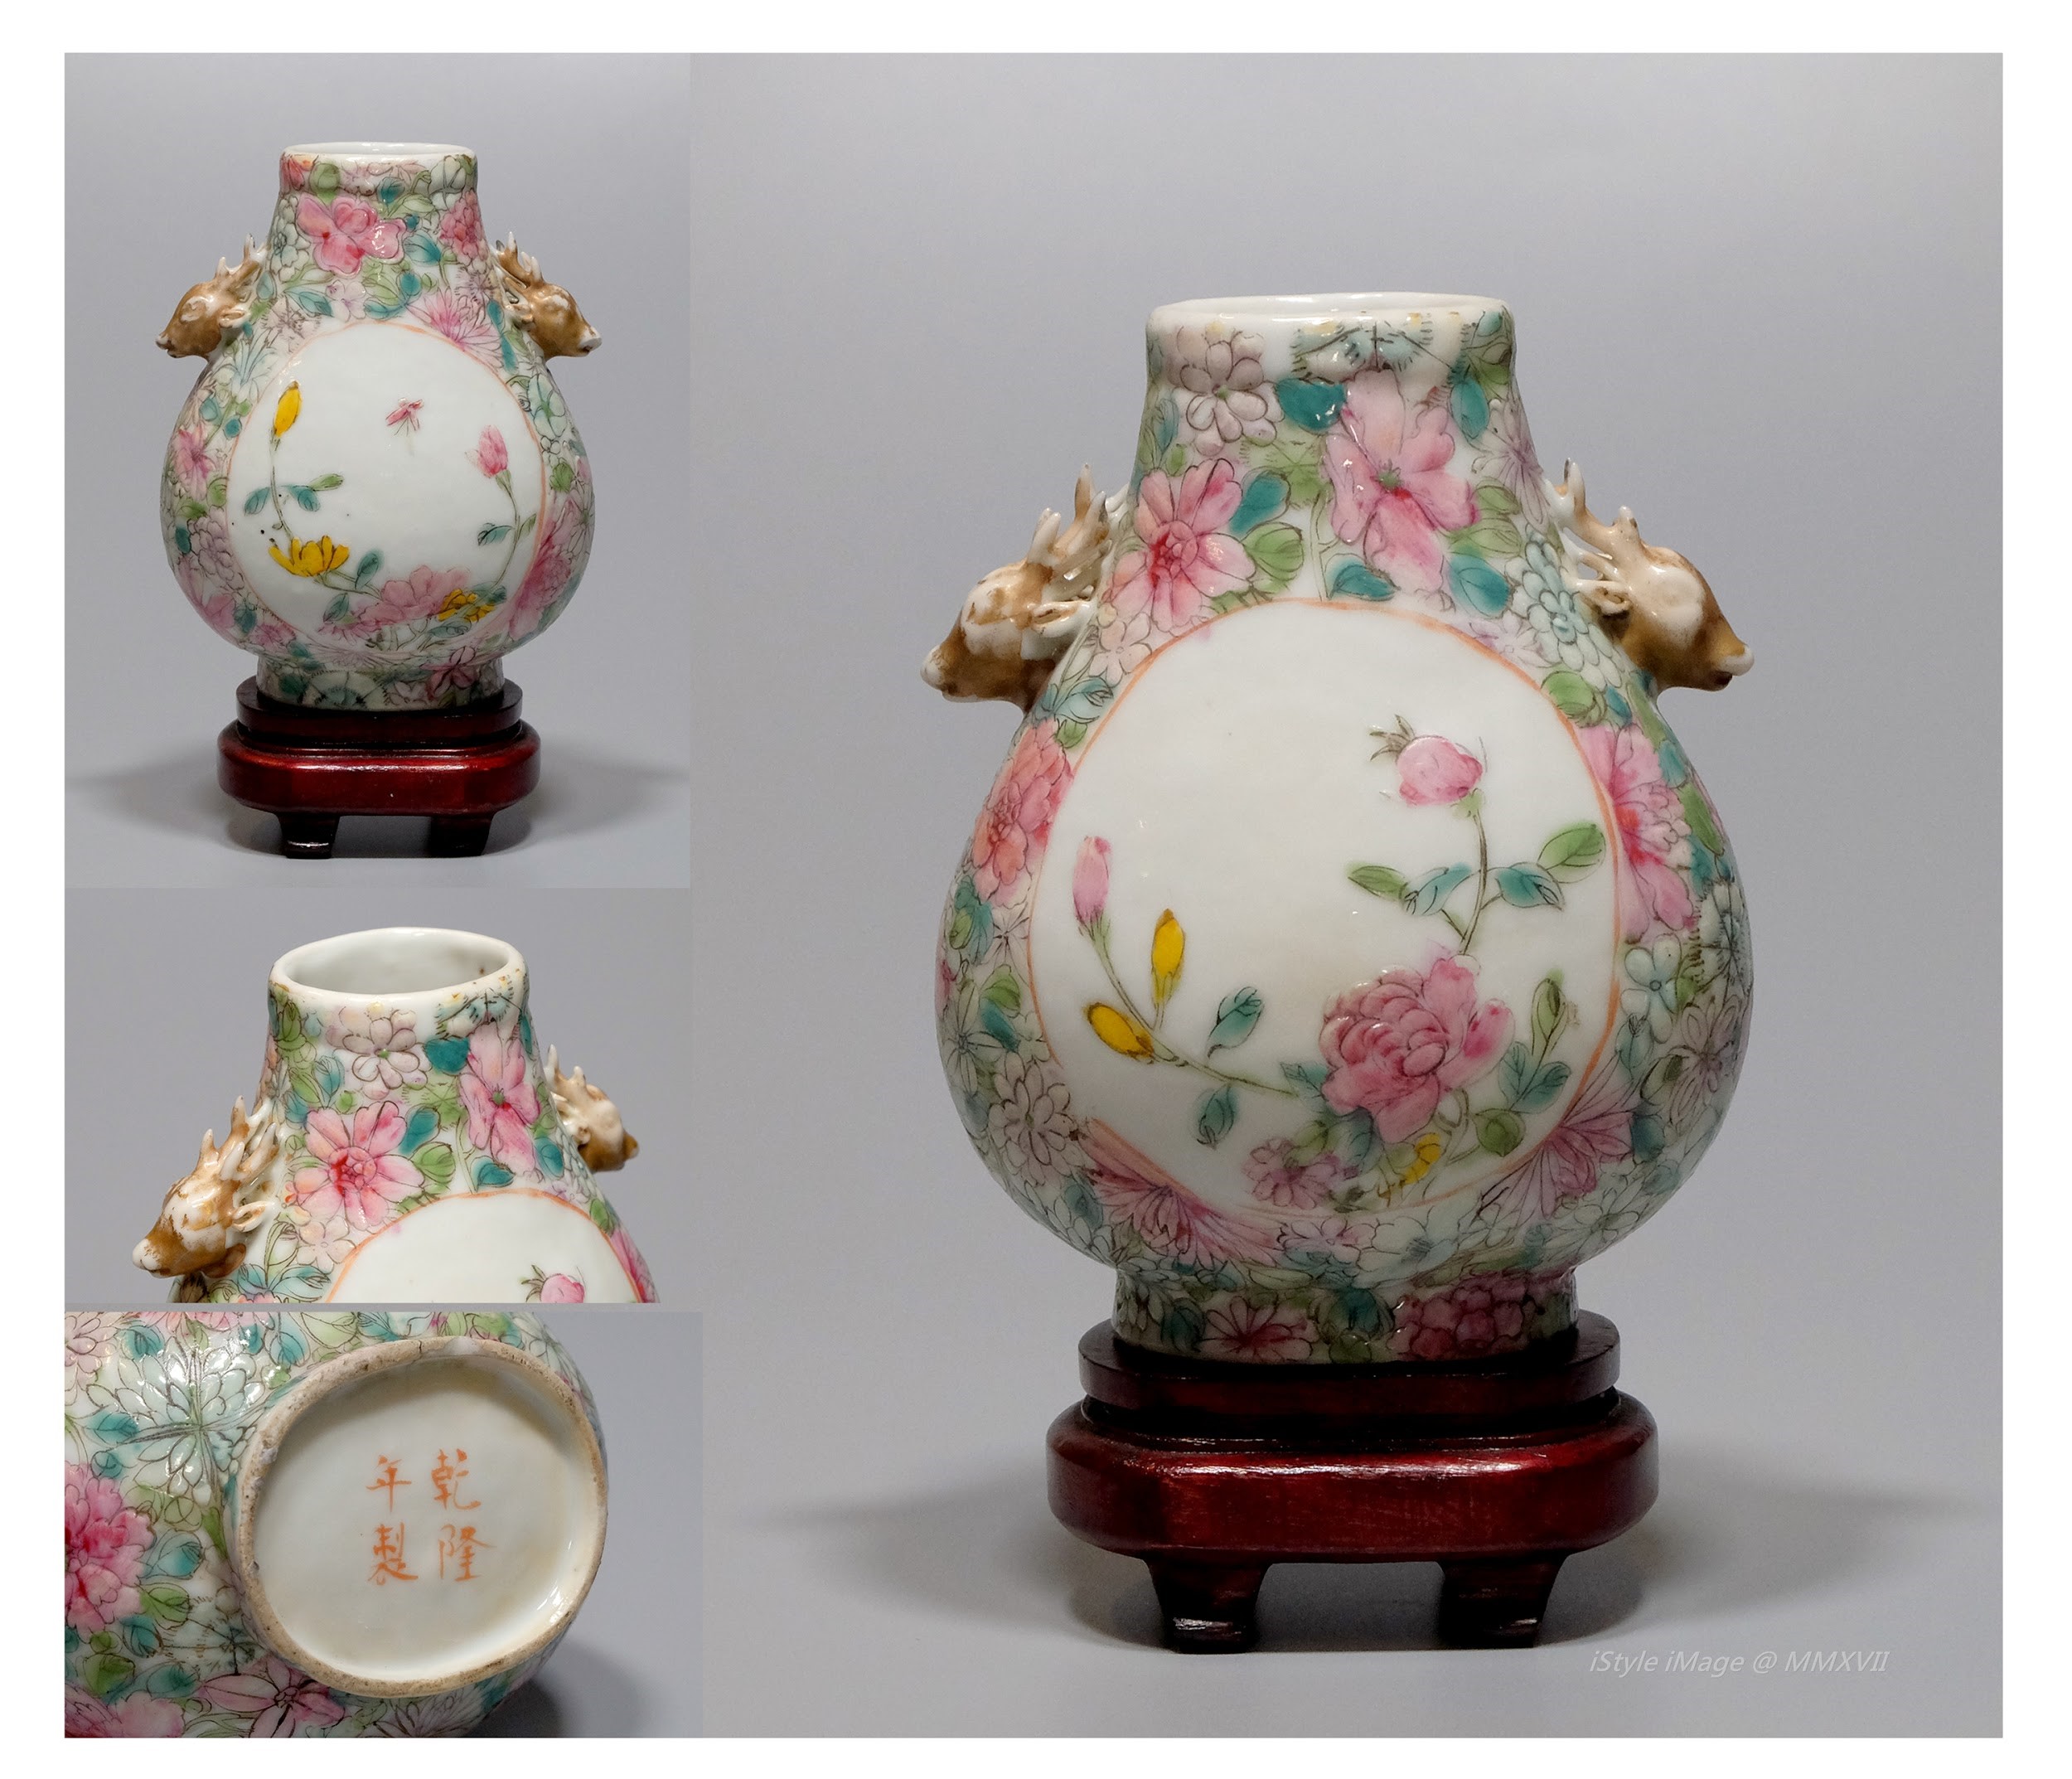 <br><h4>Lot 24 : A beautiful and unusual famille-rose moonflask vase (with Qianlong marks but early Republic)</h4>
					This beautiful famille-rose moonflask shaped in flattened globular body rising from a short foot to a cylindrical neck, unusually flanked by a pair of deer handles, each gilt in golden, the two faces enclosing with peony on one side and lotus on another side, all reserved against a famille-rose peony, prunus, and chrysanthemum floral sprays.     
					<br>The base glazed inscribed with four character [Qianlong Nián zhì].
					<br>Measurements (H) high 11.4 CM, (T) thick 7.5 CM,  (W)width 9 CM<br><br><br>一個美麗和非凡的粉彩開光花卉扁壺 ;  [乾隆年製]款，但屬民國早期<br>這種美麗的月亮形粉彩開光花卉扁壺，瓶身從短腳上升到月亮形扁體到圓柱形頸部，非常美麗地側面有一對鹿把手，每隻鹿鍍金色，一邊牡丹和另一邊蓮花在瓶身兩面， 周圍有牡丹，李花和菊花花卉。 底款[乾隆年製]<br>尺寸(H)高11.4厘米, (T)深7.5厘米, (W)濶9厘米